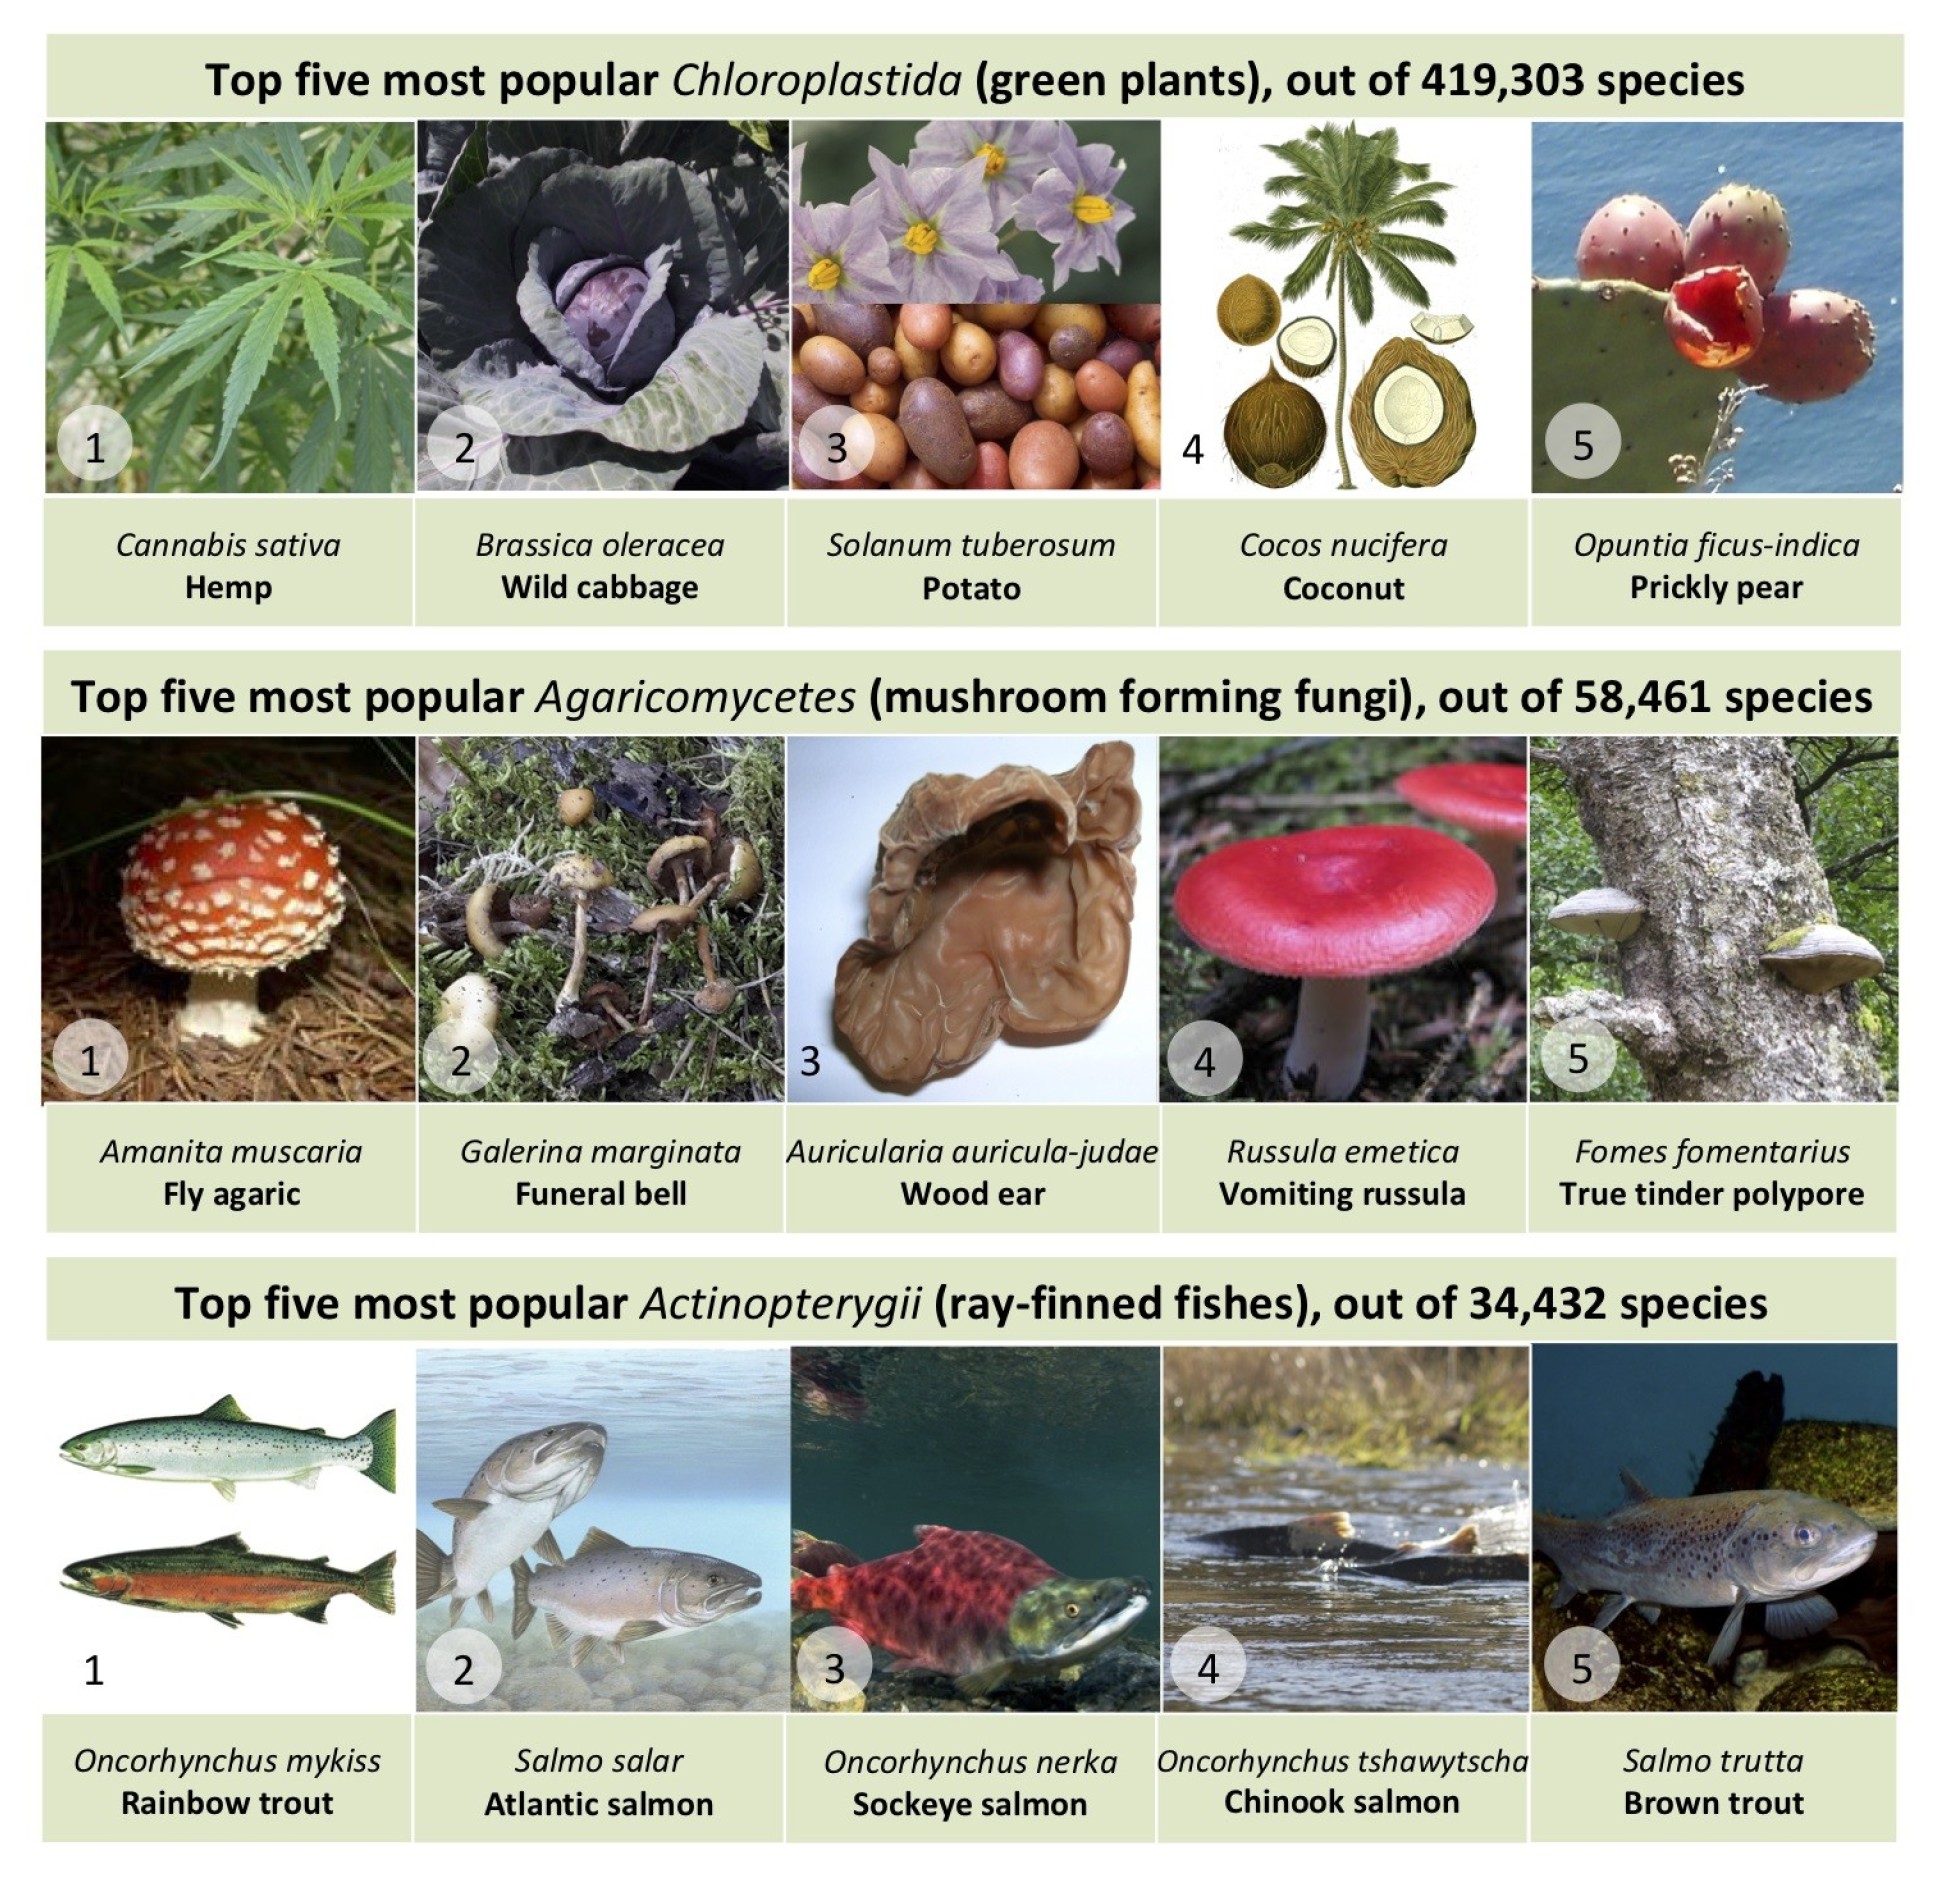 Table of most popular plants, fungi and fish